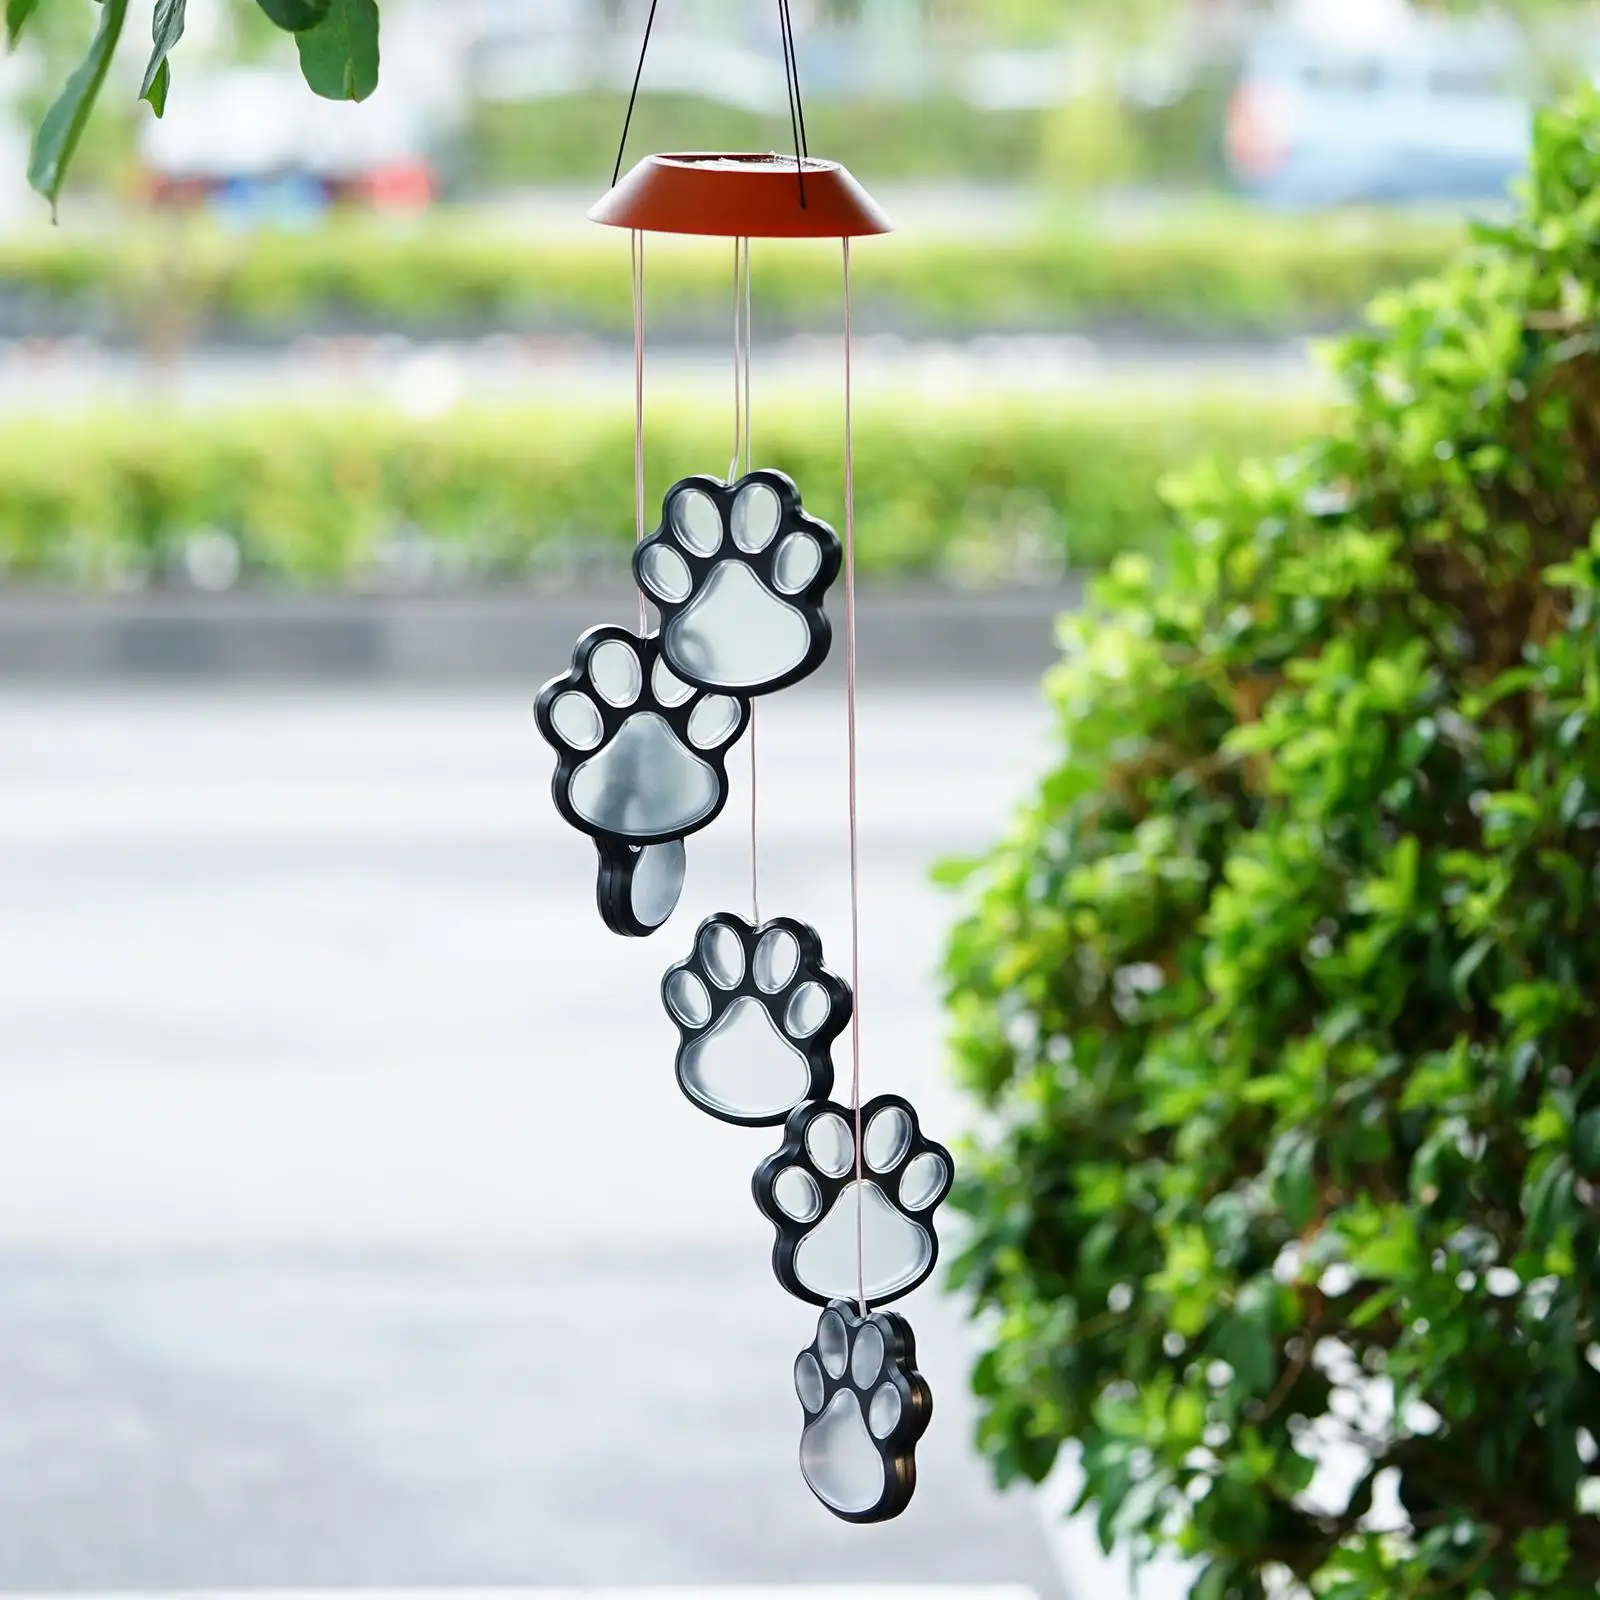 

Solar LED Wind Chimes Lights Dogs Cat Six Outdoor Pet Waterproof Color Decor Pawprint Yard Patio Changing Remembrance Balco E0C8